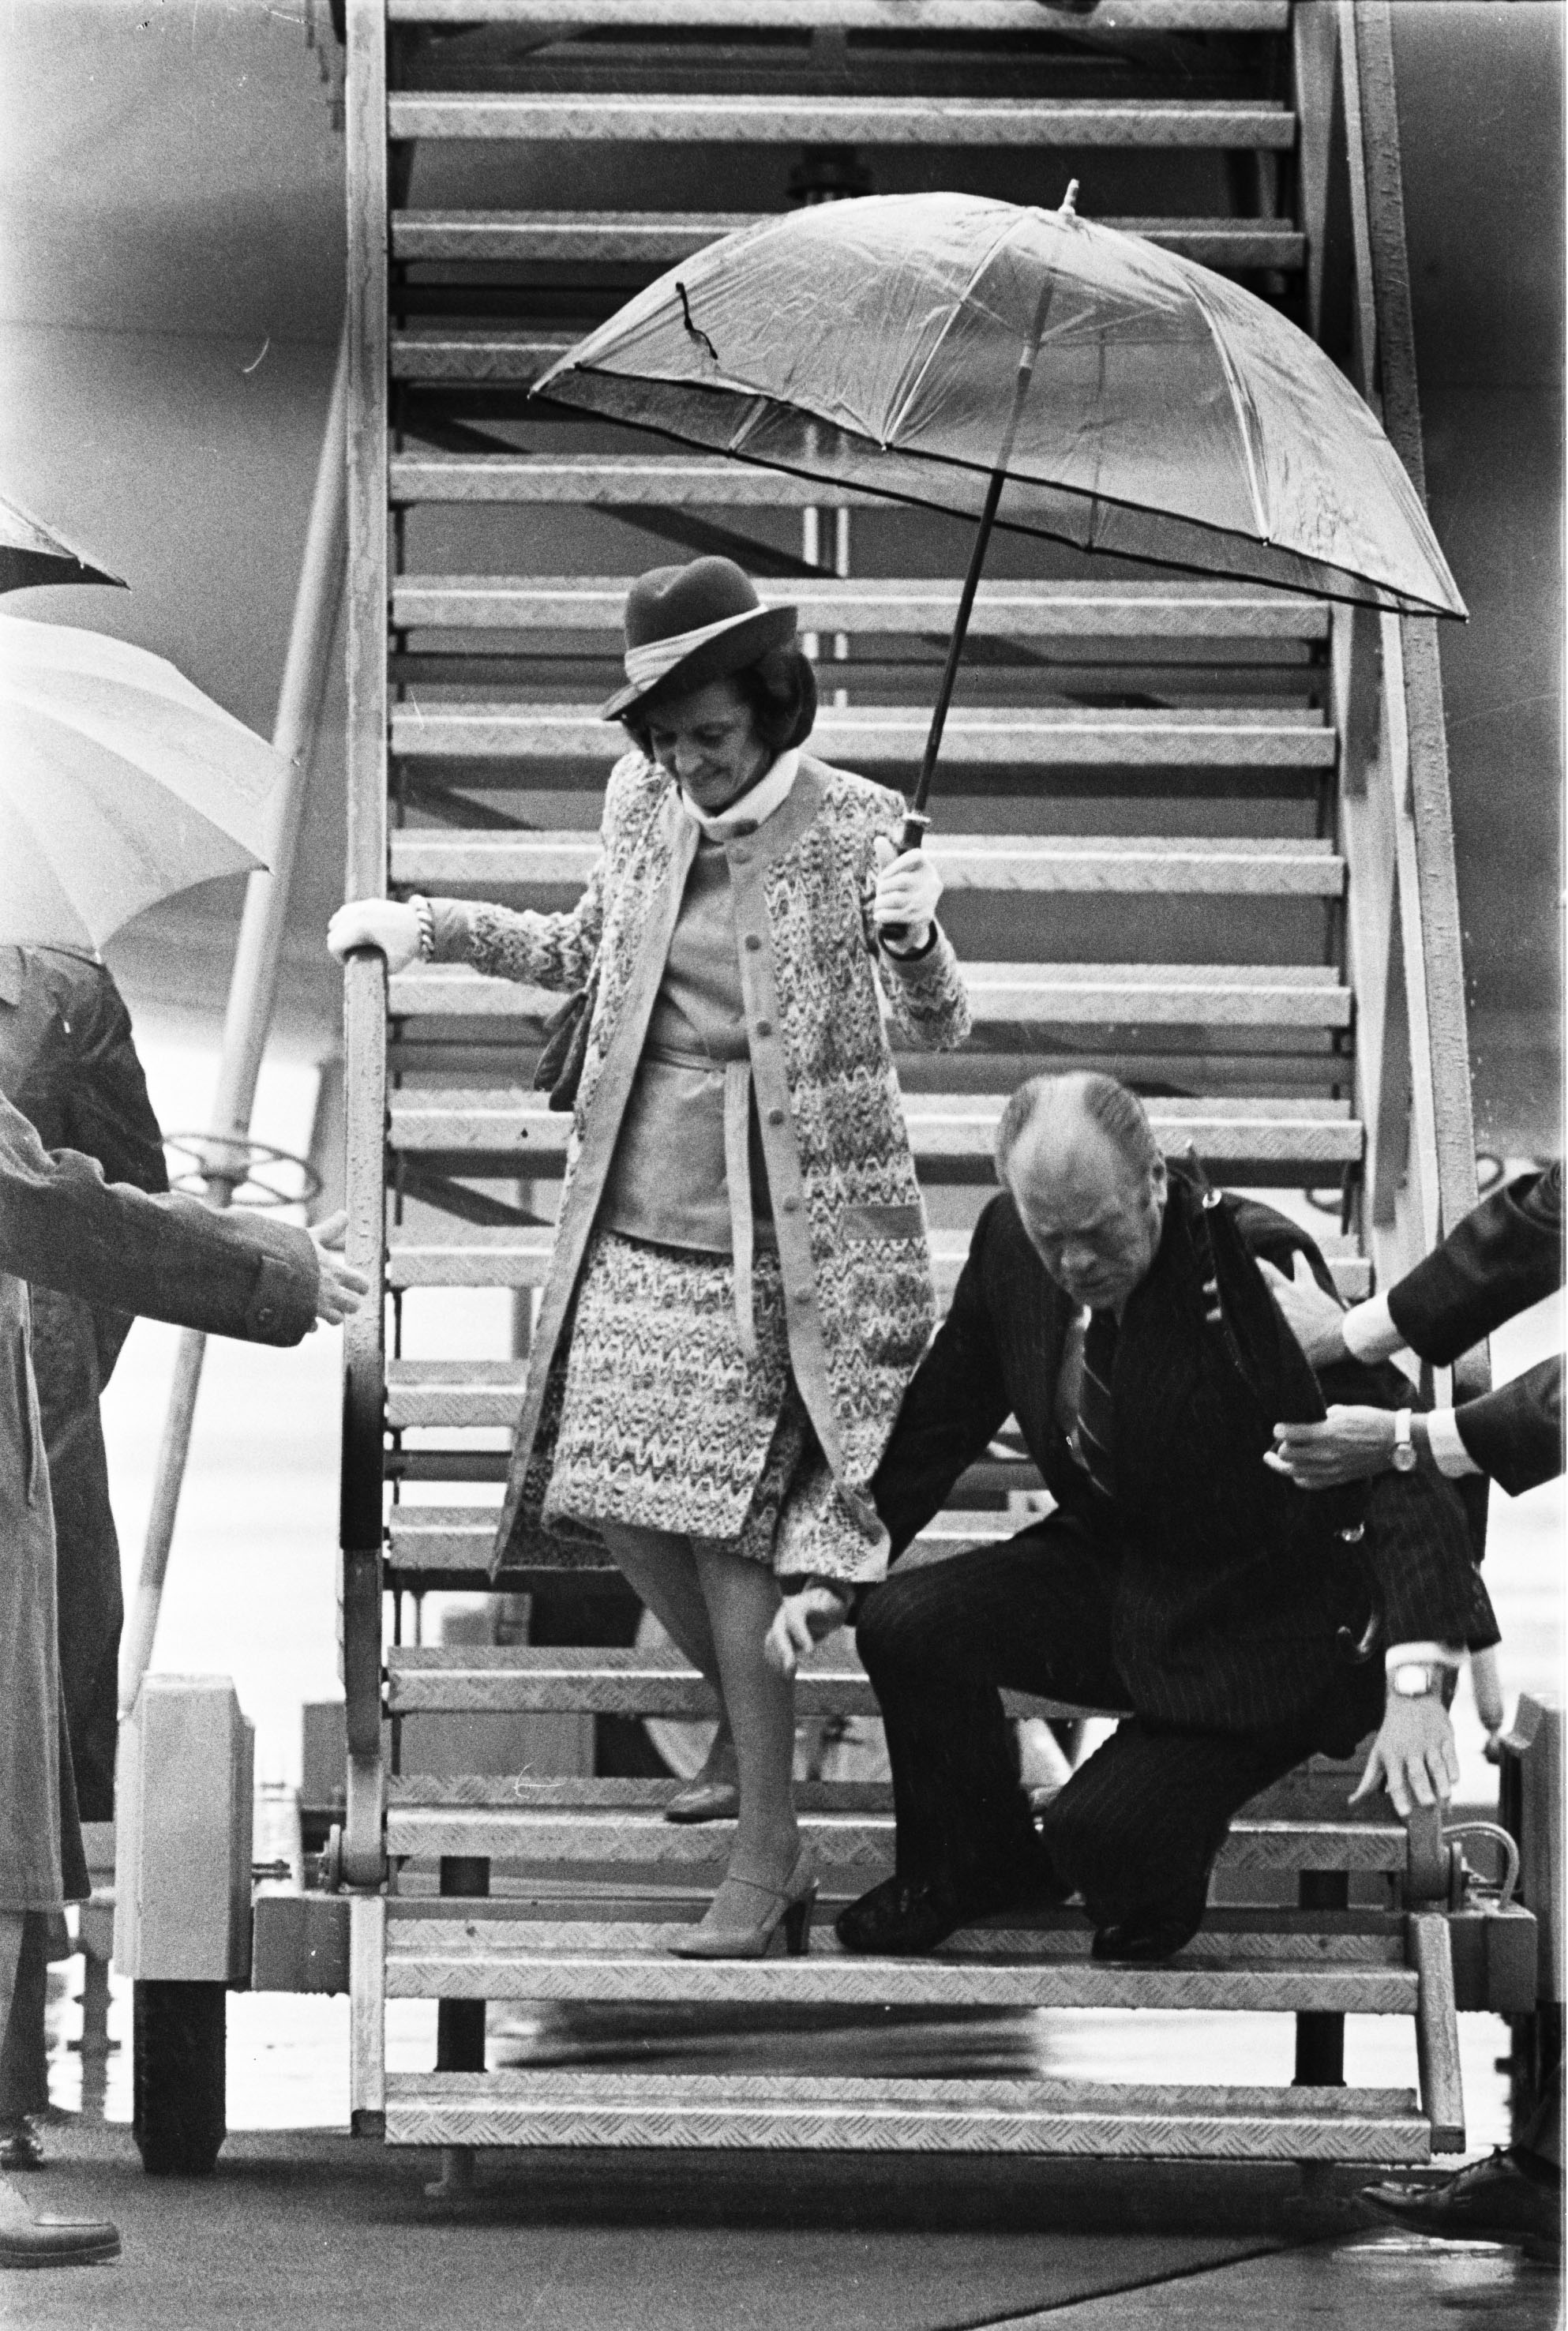 President Gerald Ford had a particularly amusing knee injury; apparently, it made him fall down. Or at least, that's what he claimed. While visiting Austria in 1975, the President's bum knee gave way and he tumbled down the Air Force One stairs. A few more falls (one was even up the stairs) combined with Chevy Chase's Saturday Night Live pratfall routine, earned the former University of Michigan football star a reputation as a bumbling klutz. Well, at least it's better than no reputation at all.